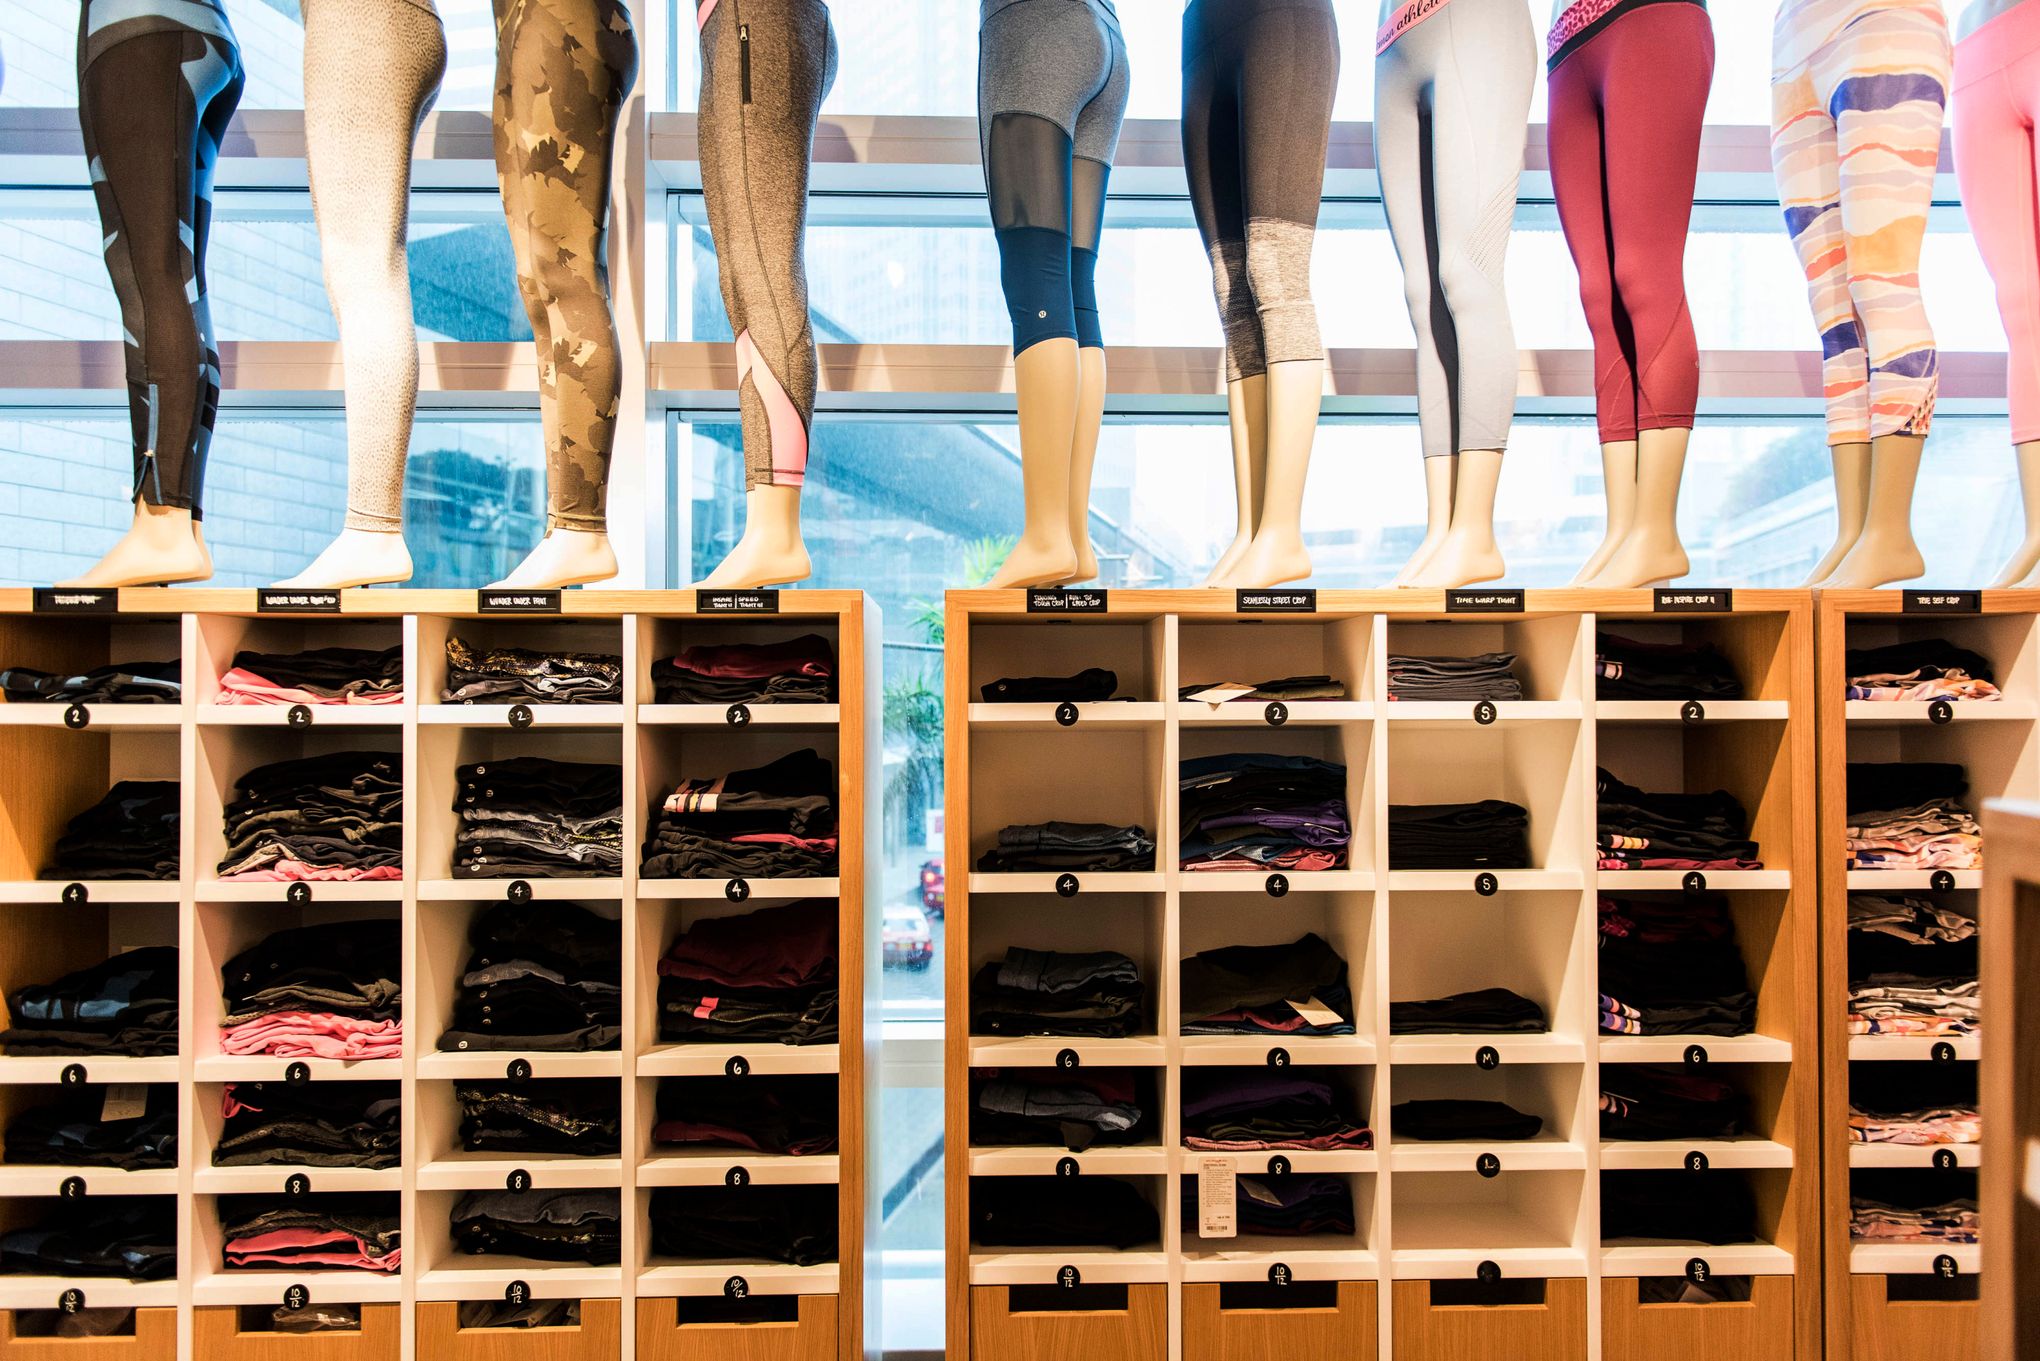 How America became a nation of yoga pants